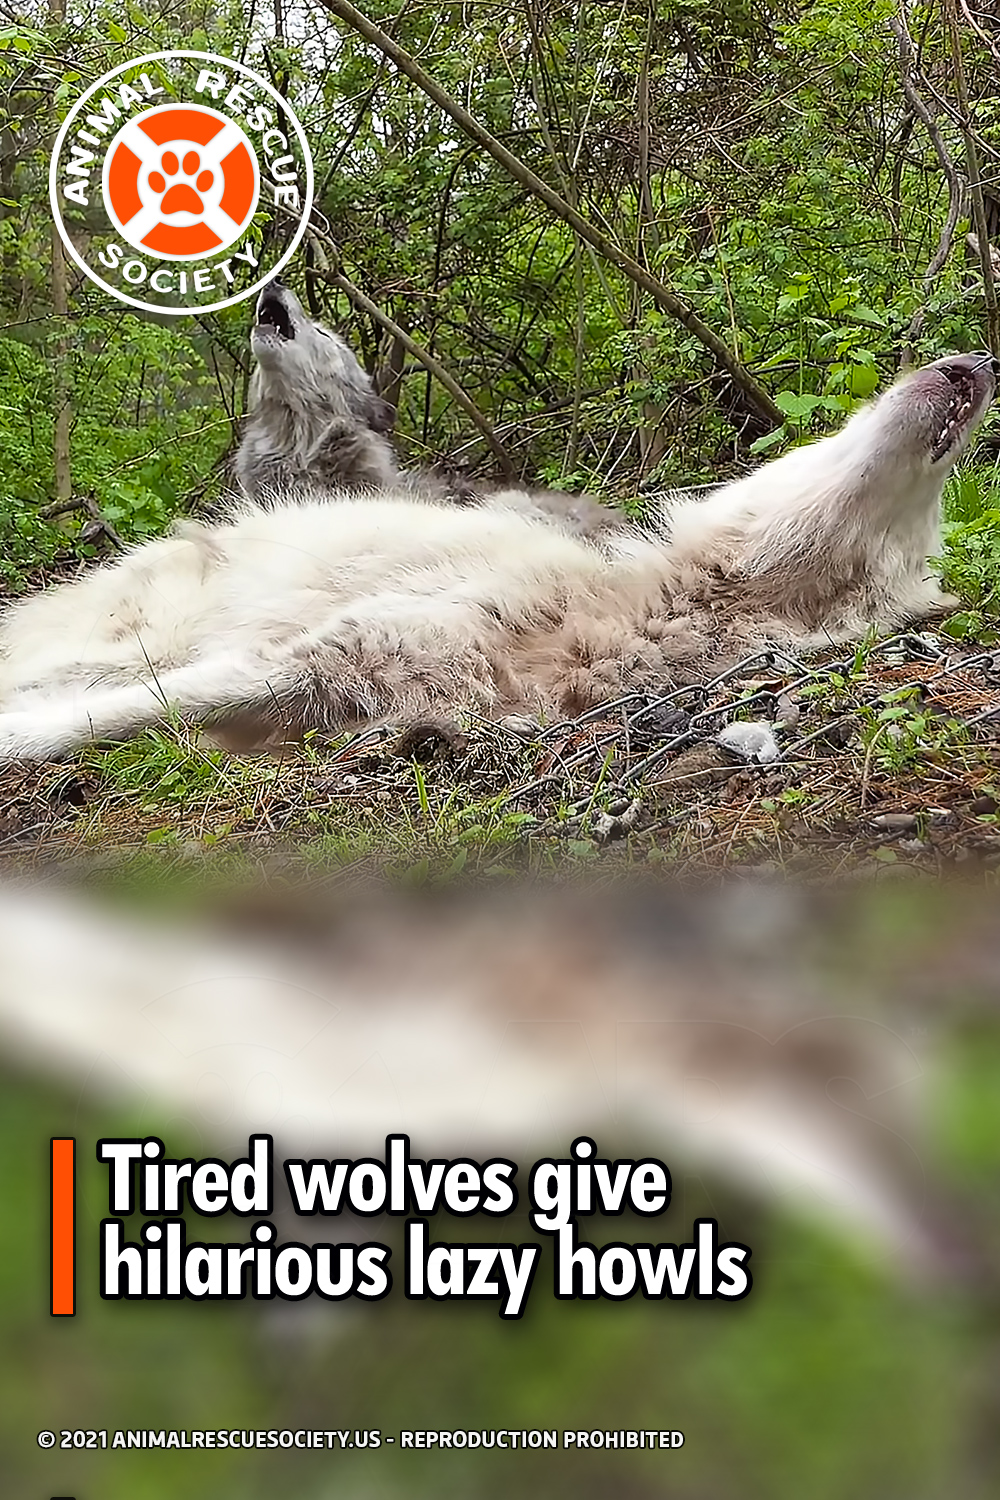 Tired wolves give hilarious lazy howls